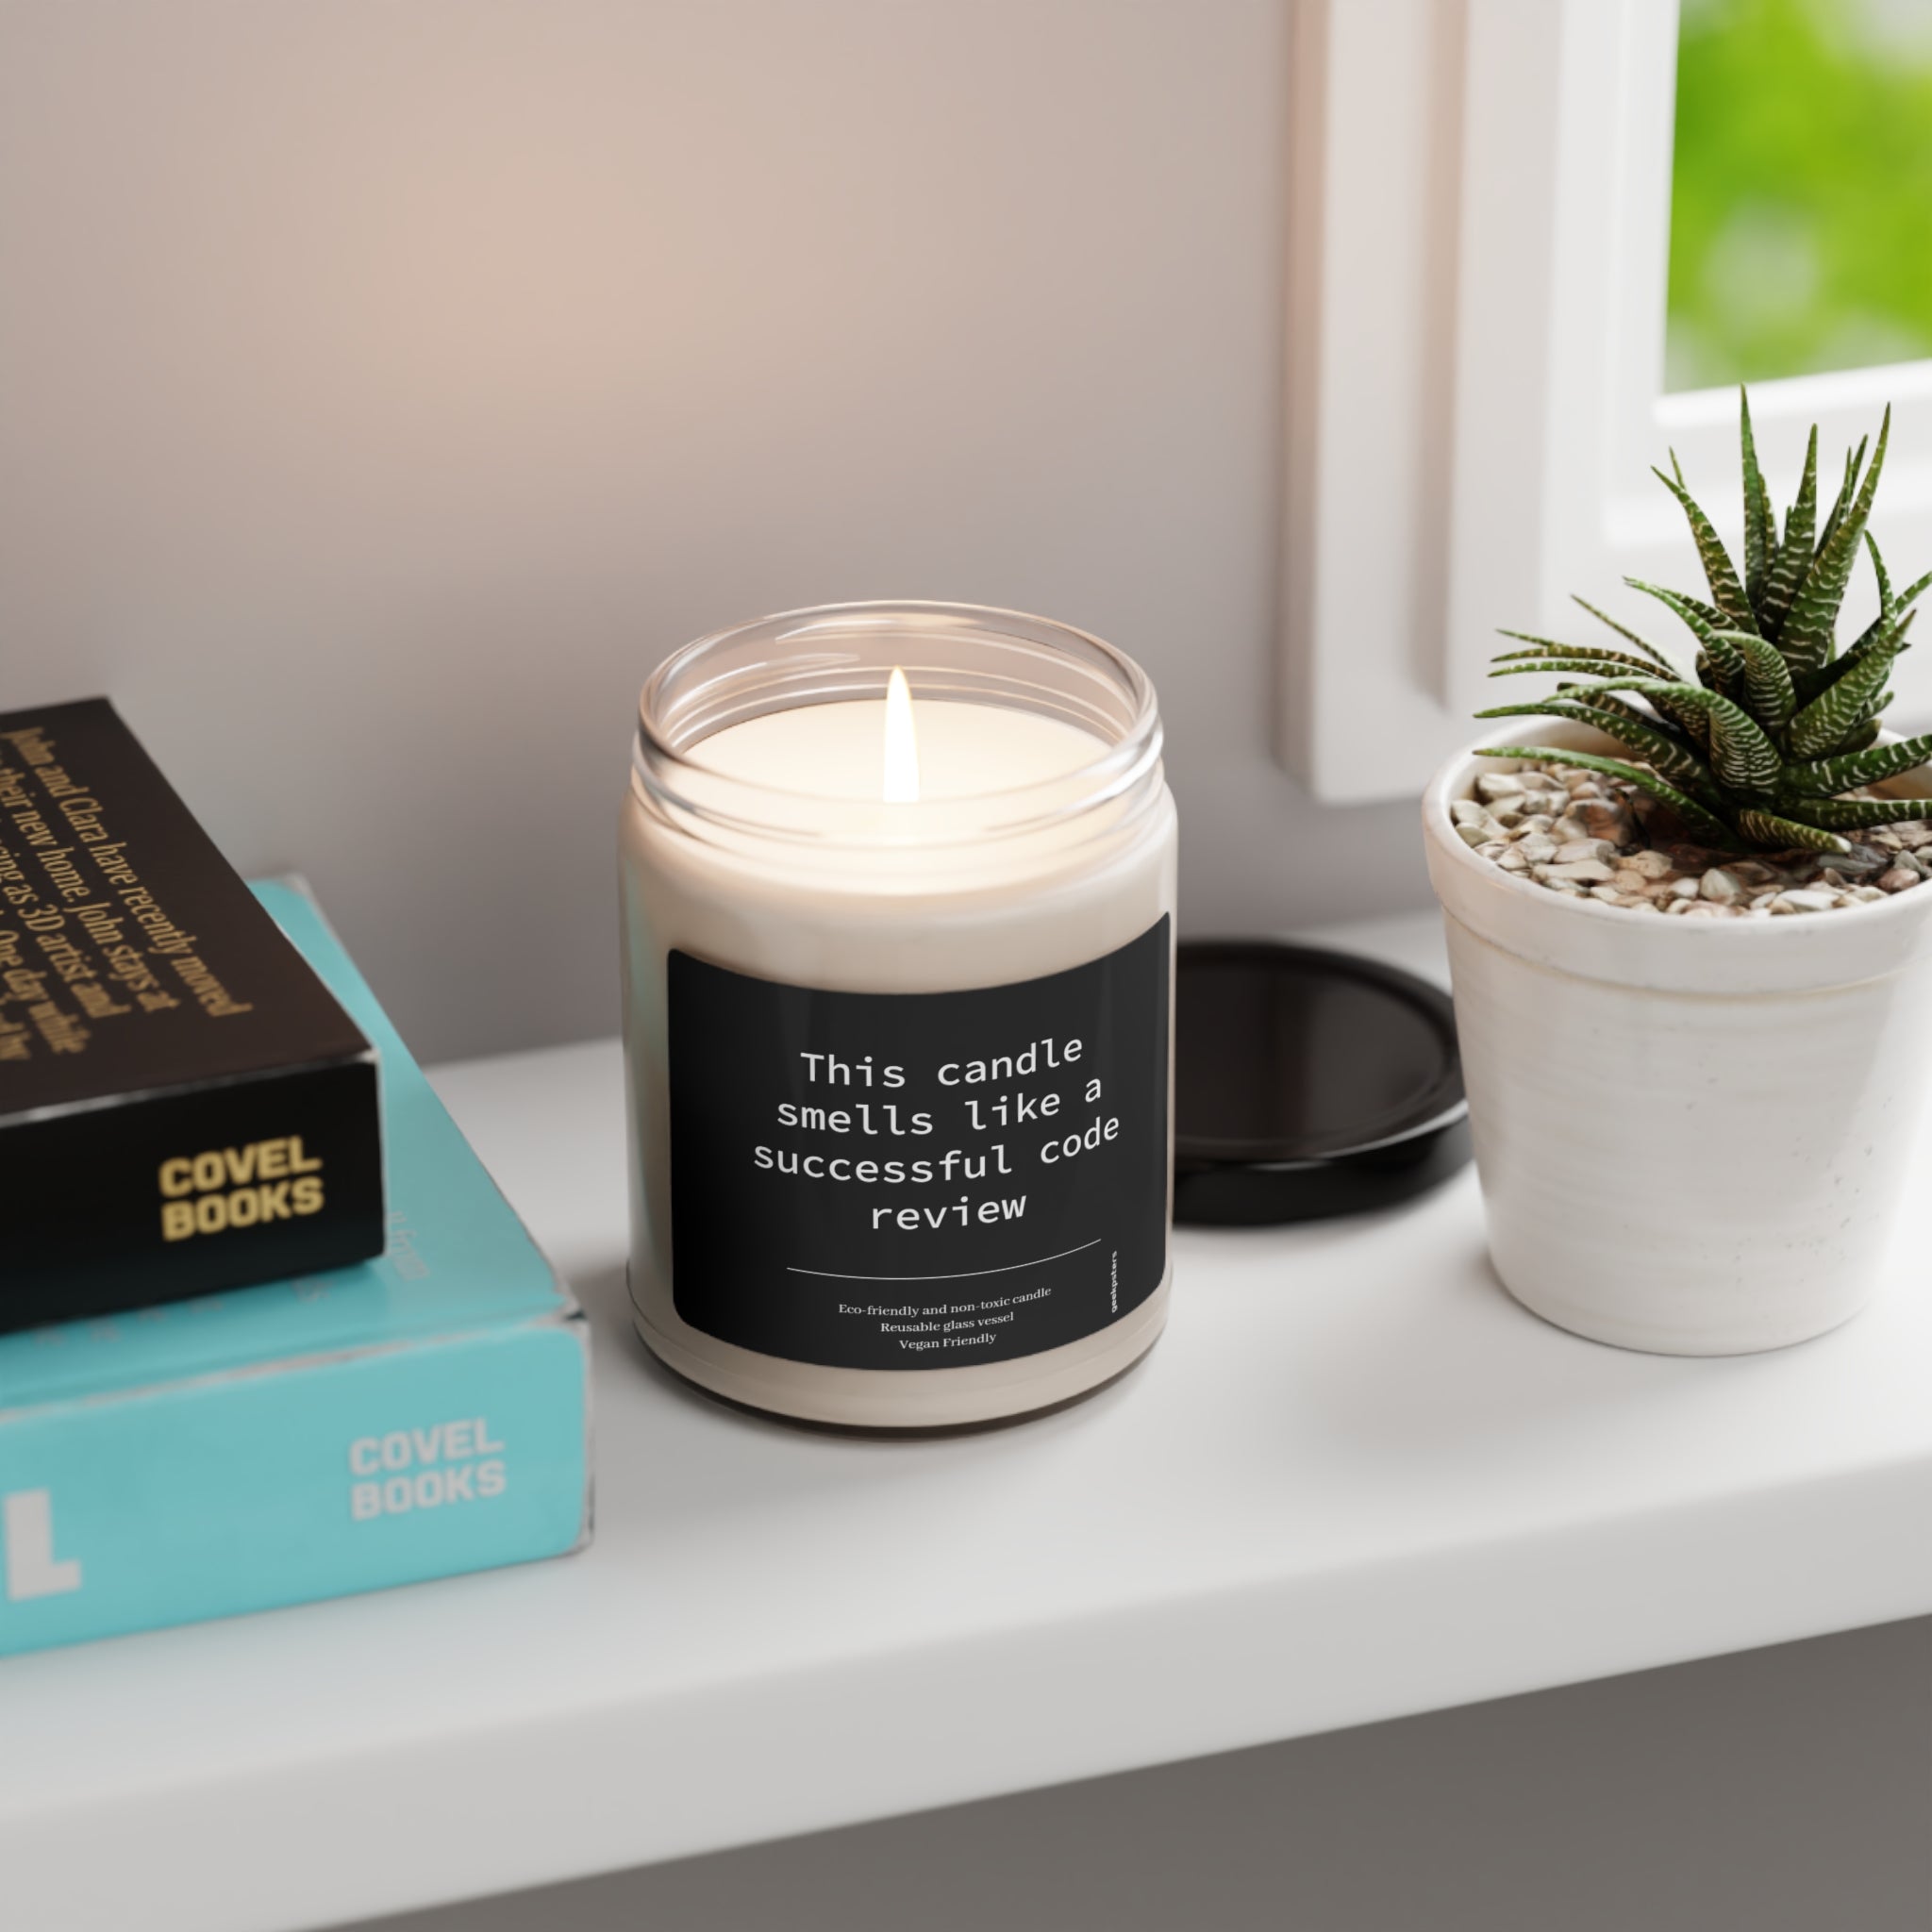 A lit This Candle Smells like a Successful Code Review - Scented Soy Candle, 9oz labeled "this candle smells like a successful coding session" on a windowsill, next to books and a potted succulent.